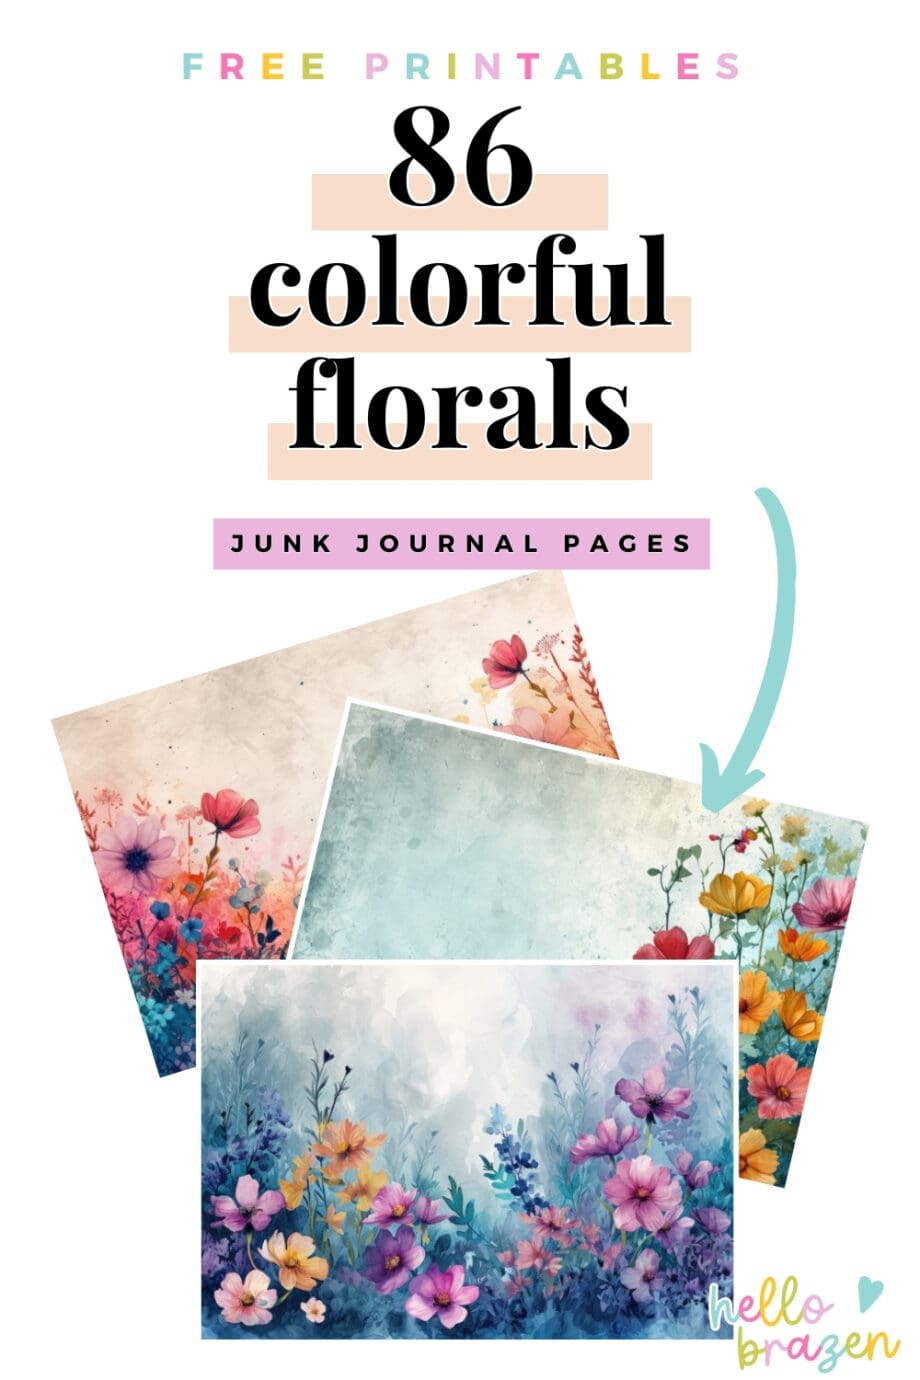 Step into a world where creativity never fades with the 'Colorful Florals' Junk Journal Collection. This digital selection is bursting with floral images that range from delicate whispers of spring to the bold statements of summer. Crafted for the artist in everyone, these pieces are Free For Personal and Commercial Use, inviting you to spread your creative wings in a marketplace blooming with possibility or in the private garden of your own crafting space.